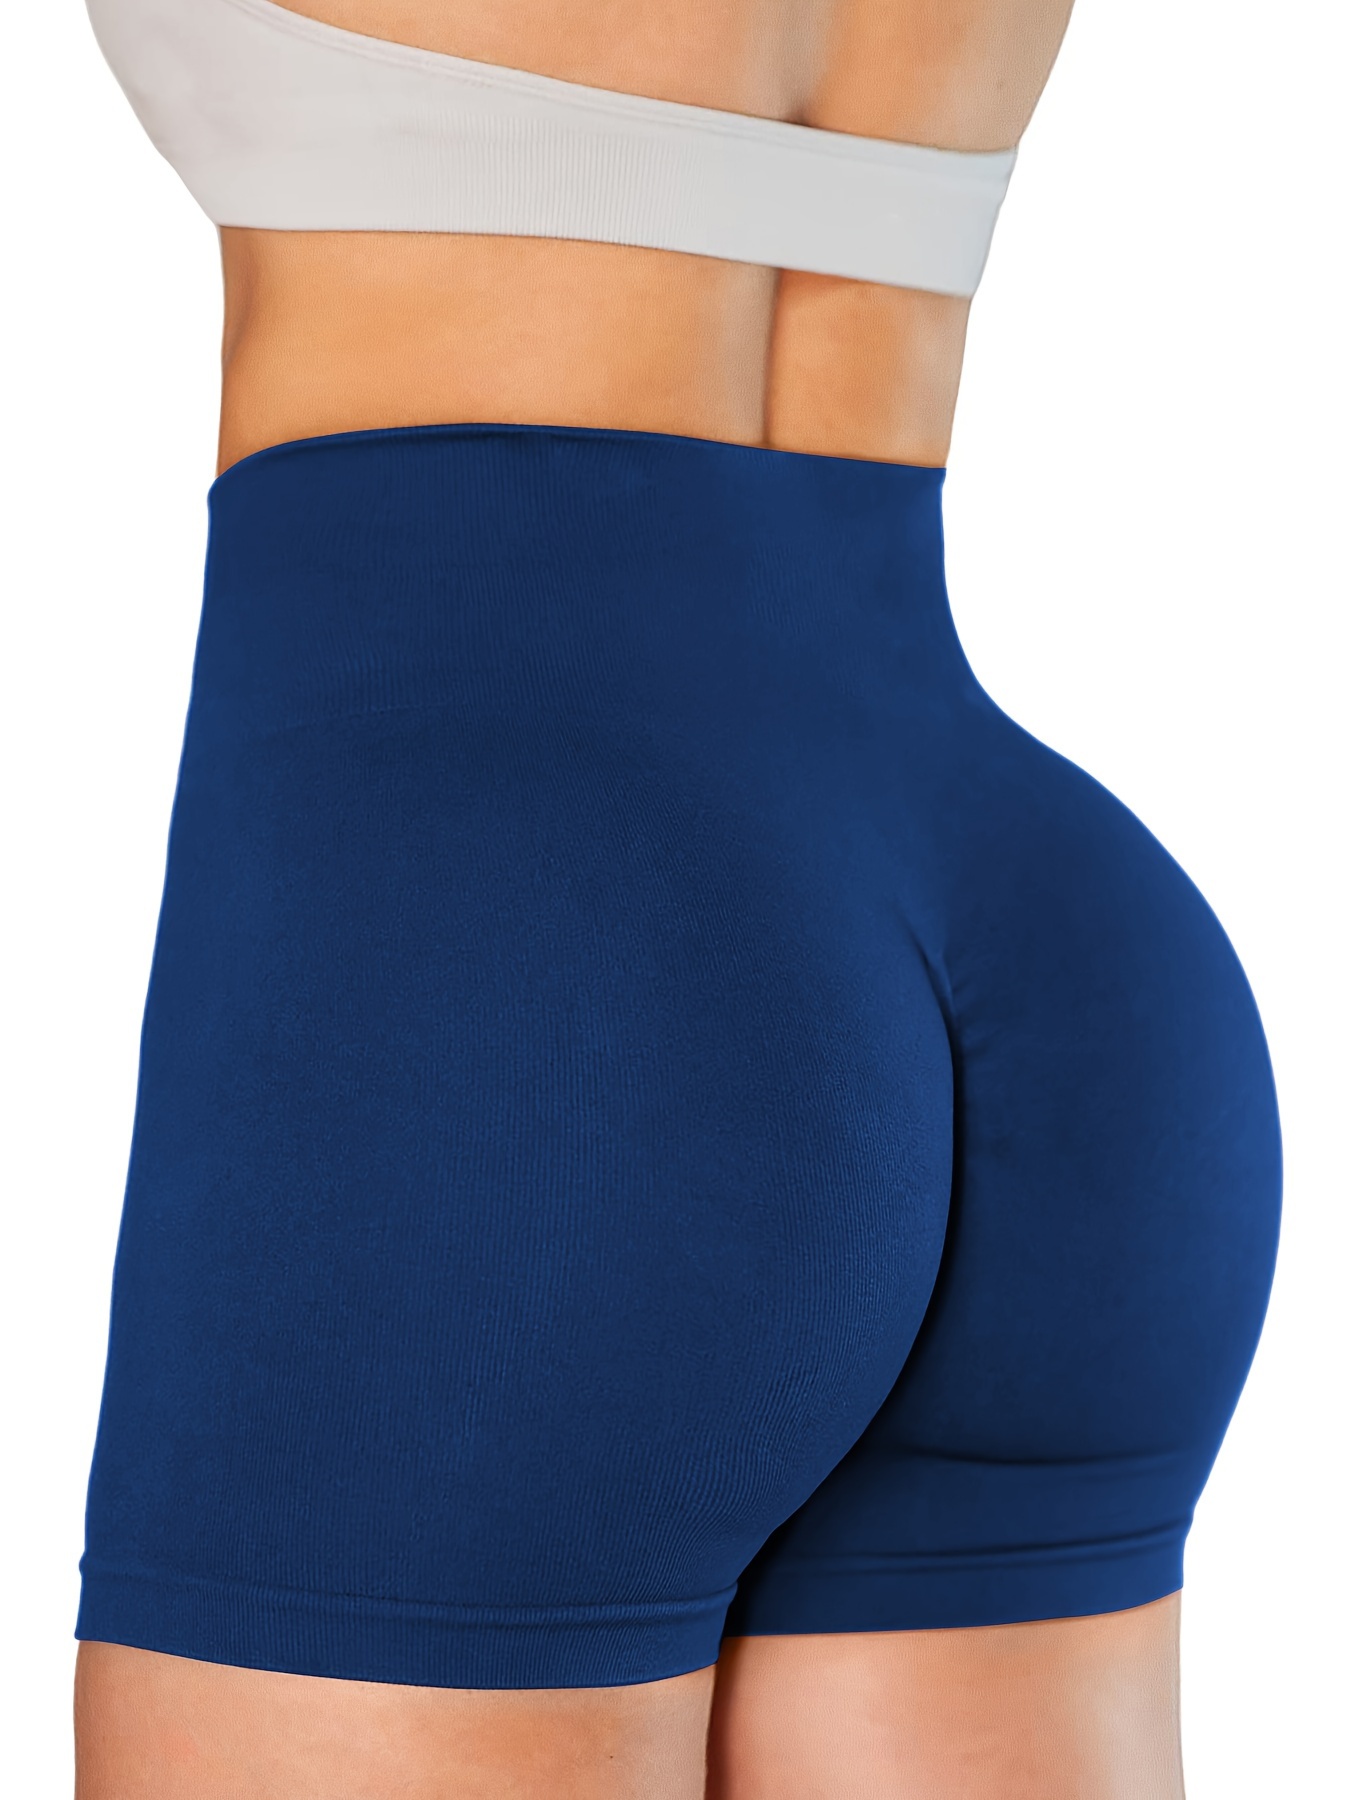 solid color quick drying yoga workout shorts high stretch sports running shorts womens activewear details 40